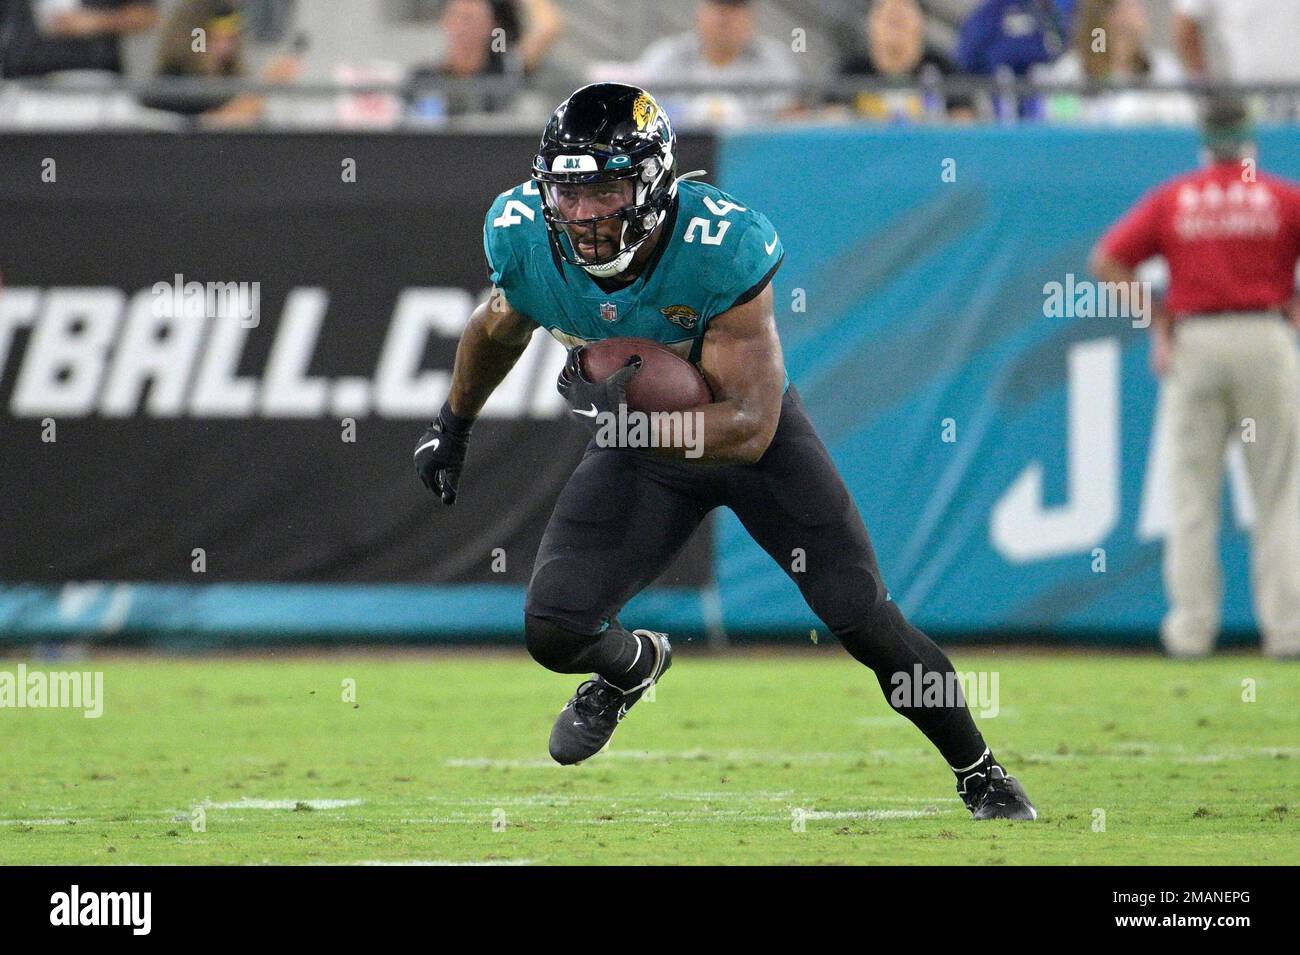 Jacksonville Jaguars running back Snoop Conner (24) rushes for yardage  during the first half of a preseason NFL football game against the  Pittsburgh Steelers, Saturday, Aug. 20, 2022, in Jacksonville, Fla. (AP